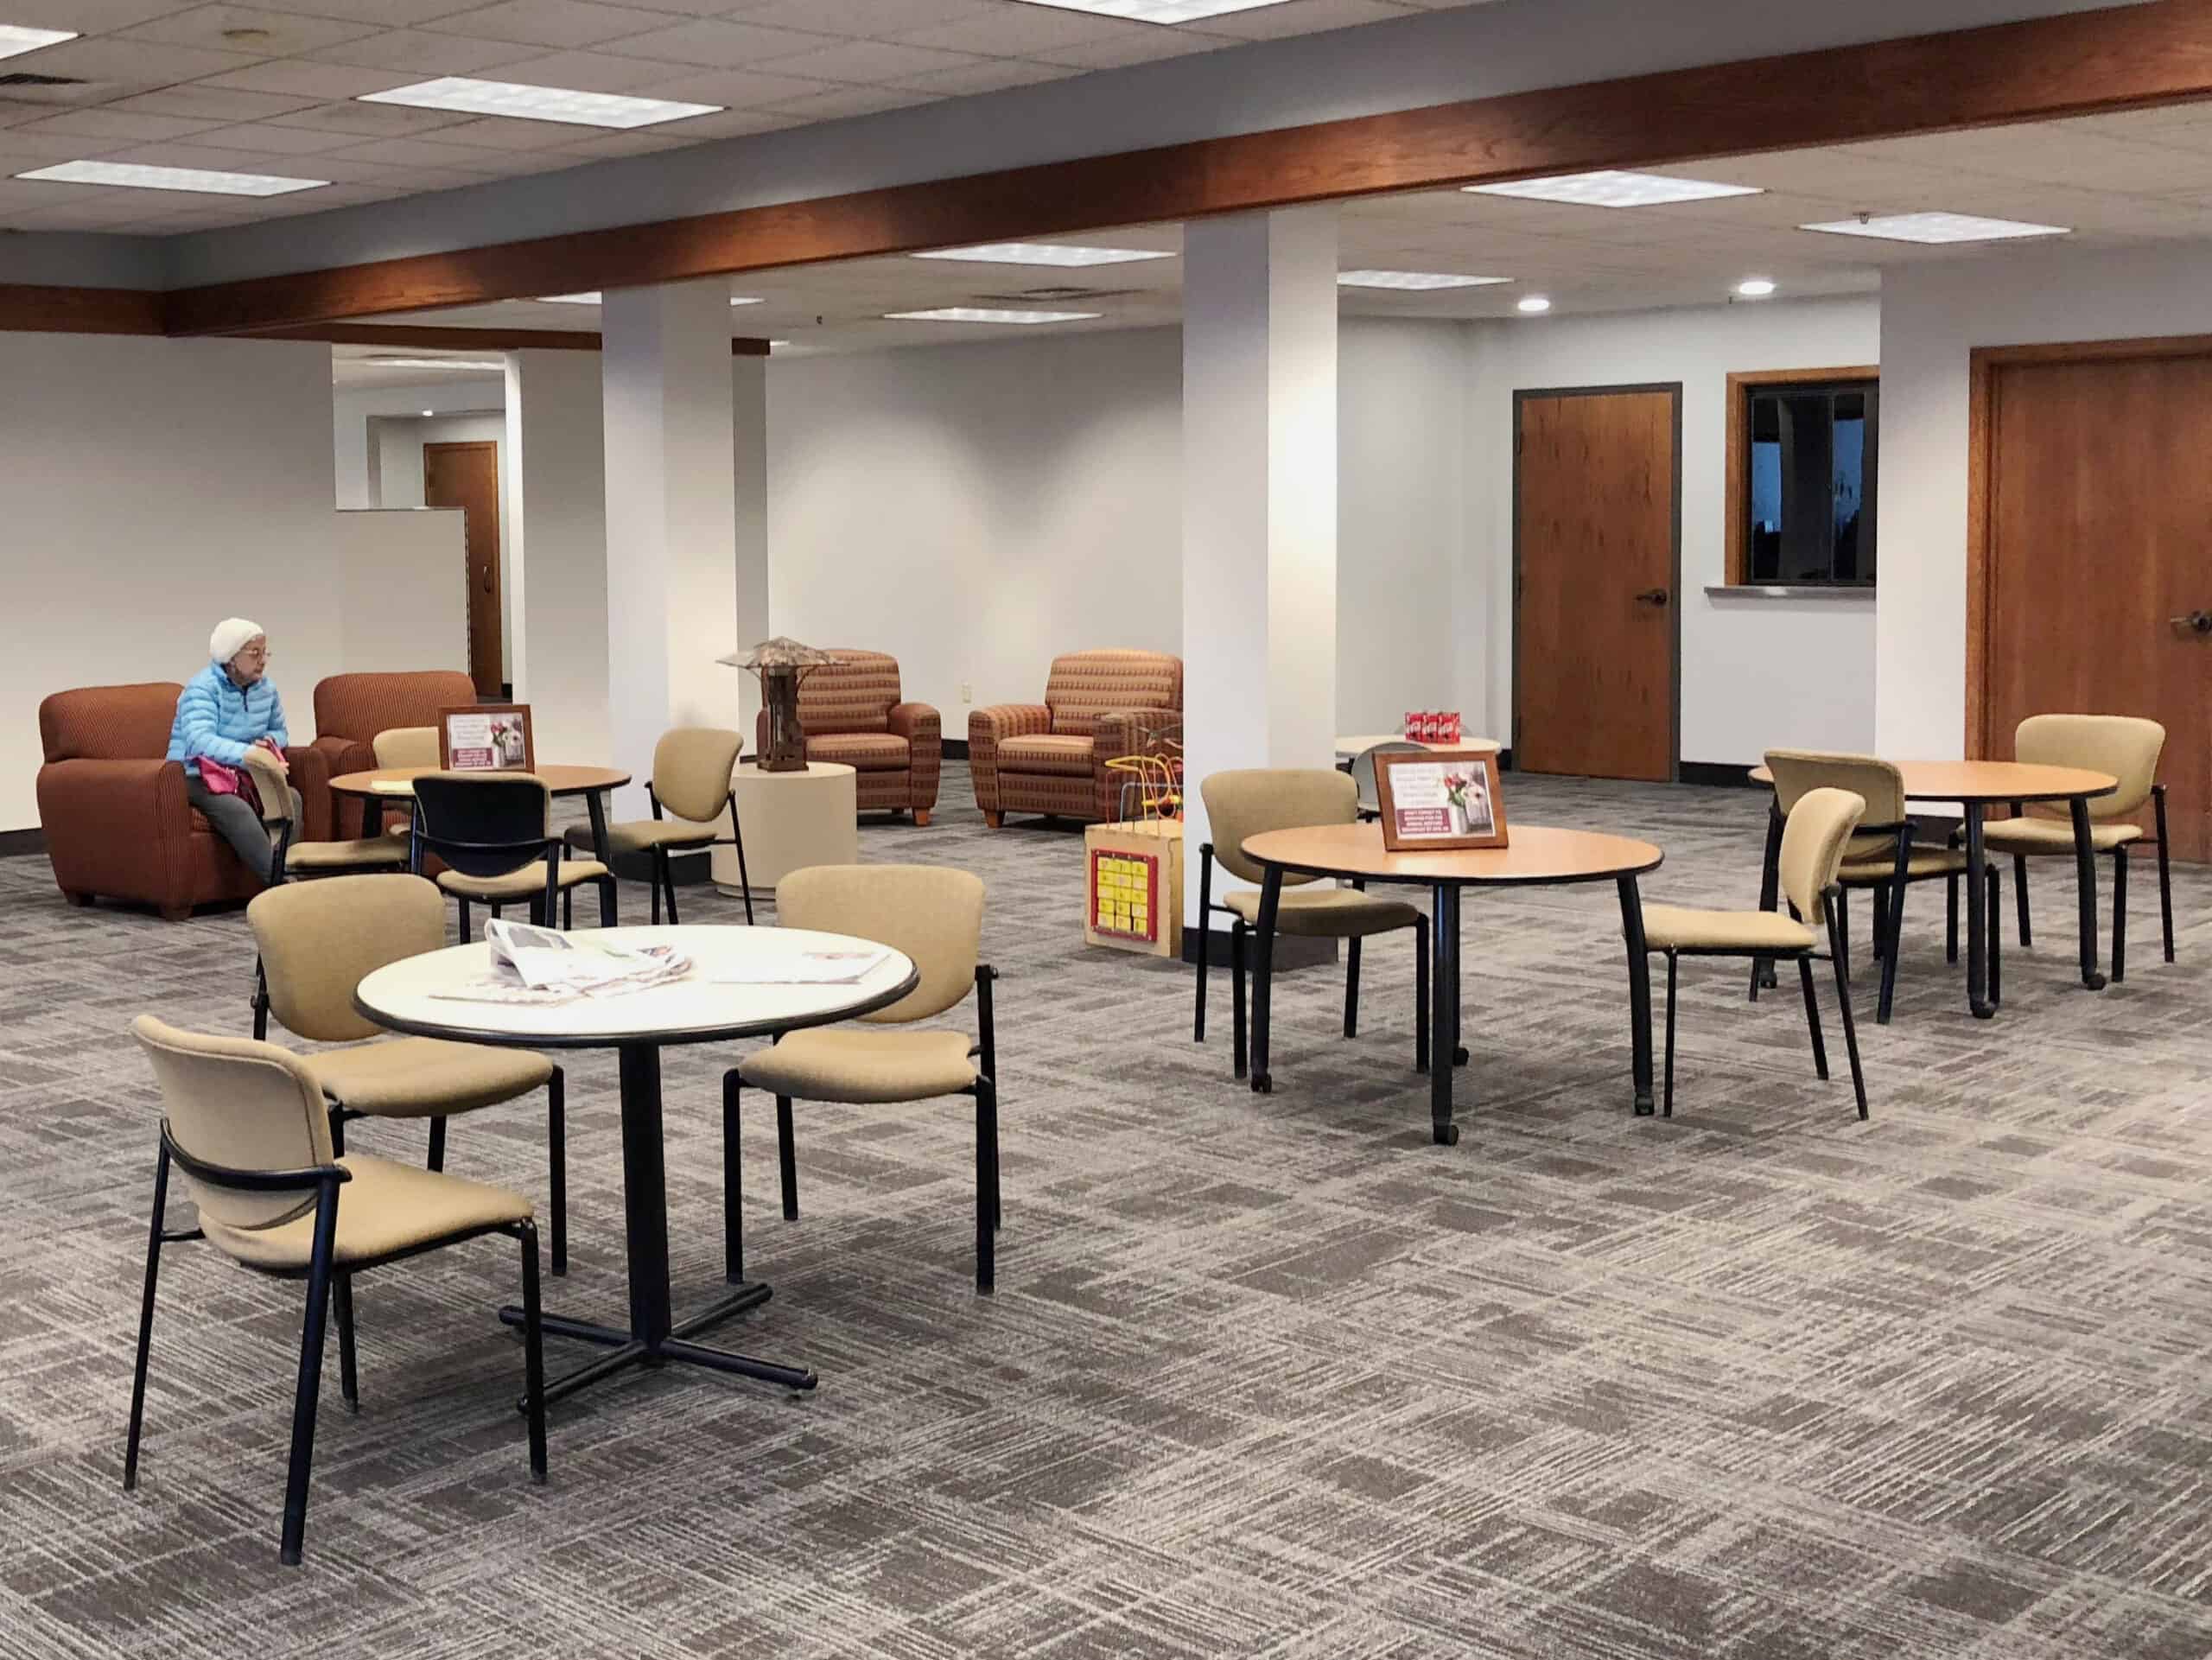 updated newman office space with tables and chairs for members